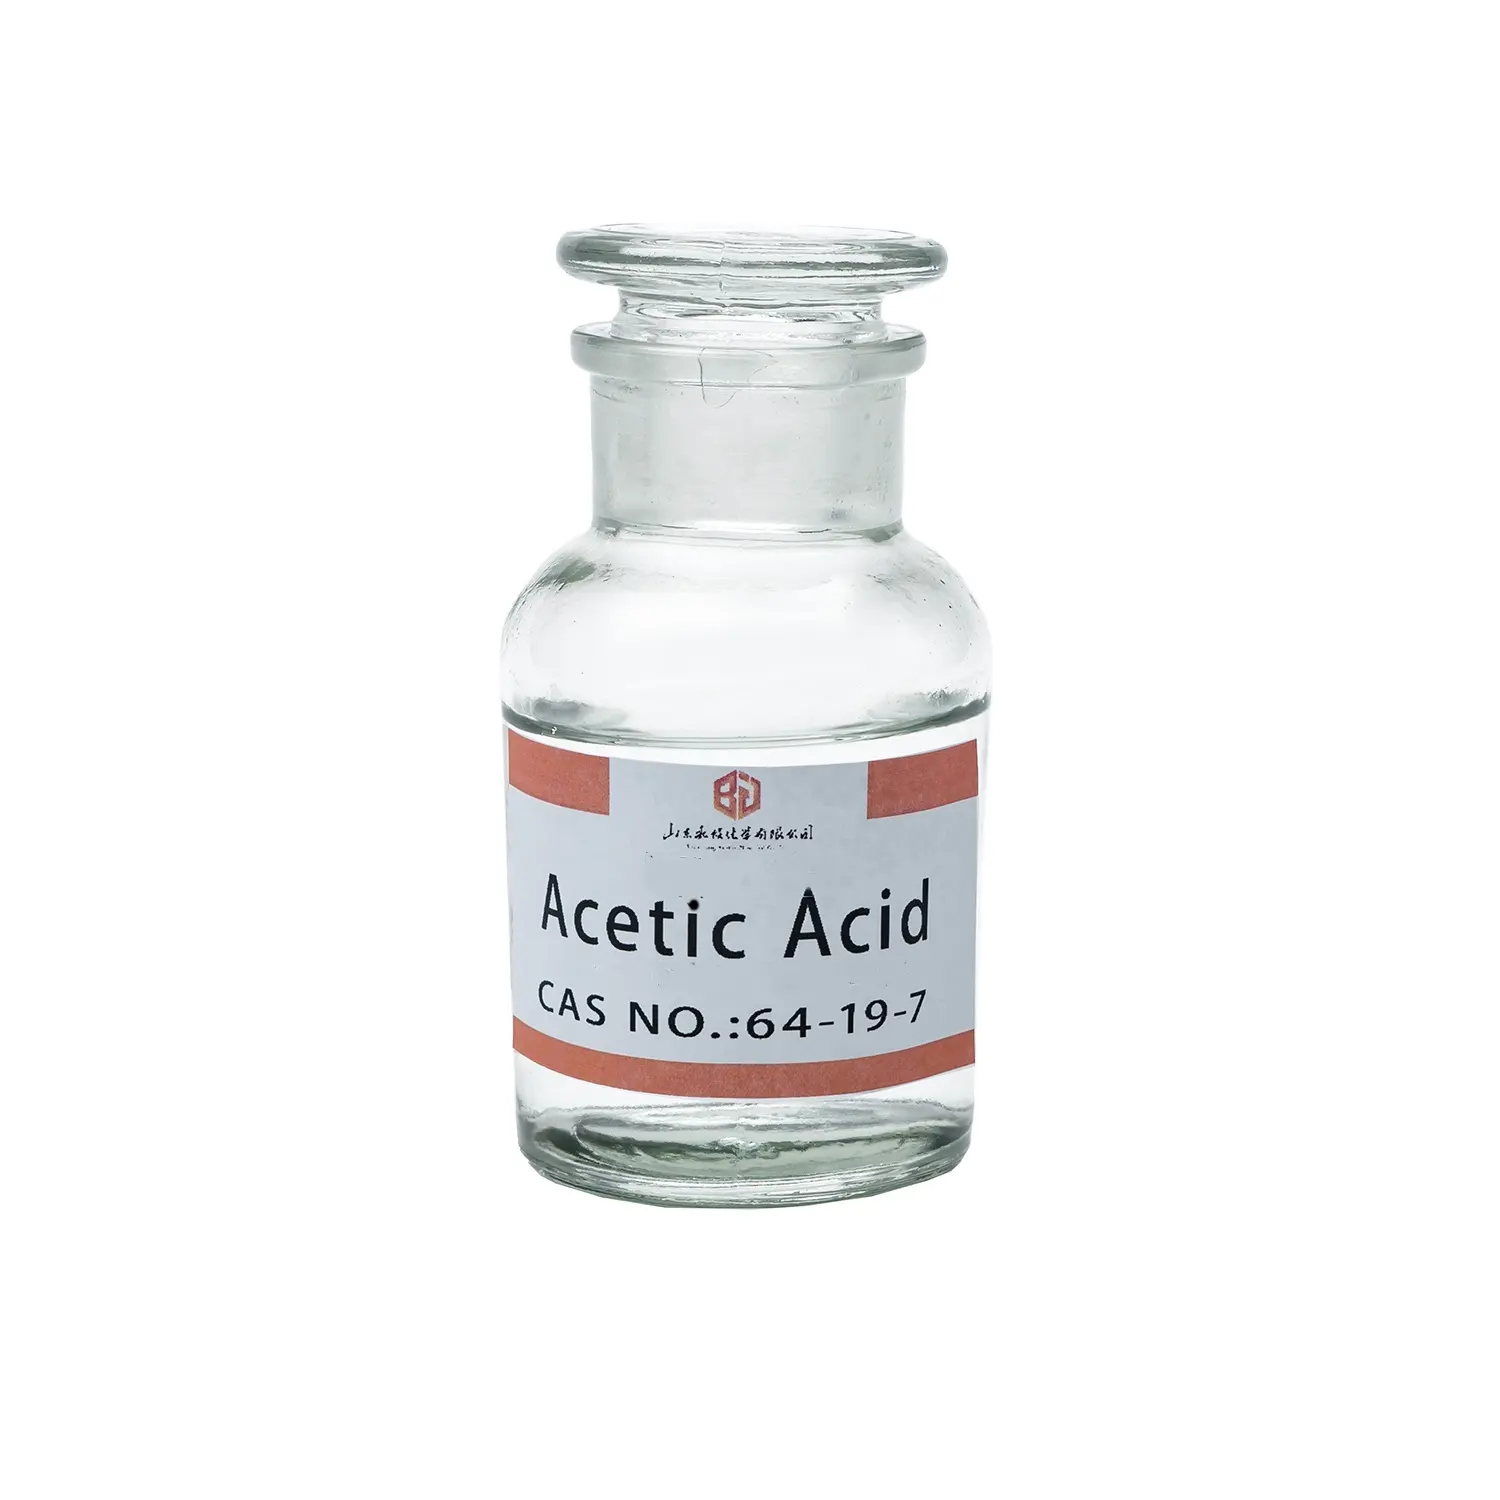 Acetic acid 99.9% is used in the manufacture of paints and adhesives cas no.64-19-7